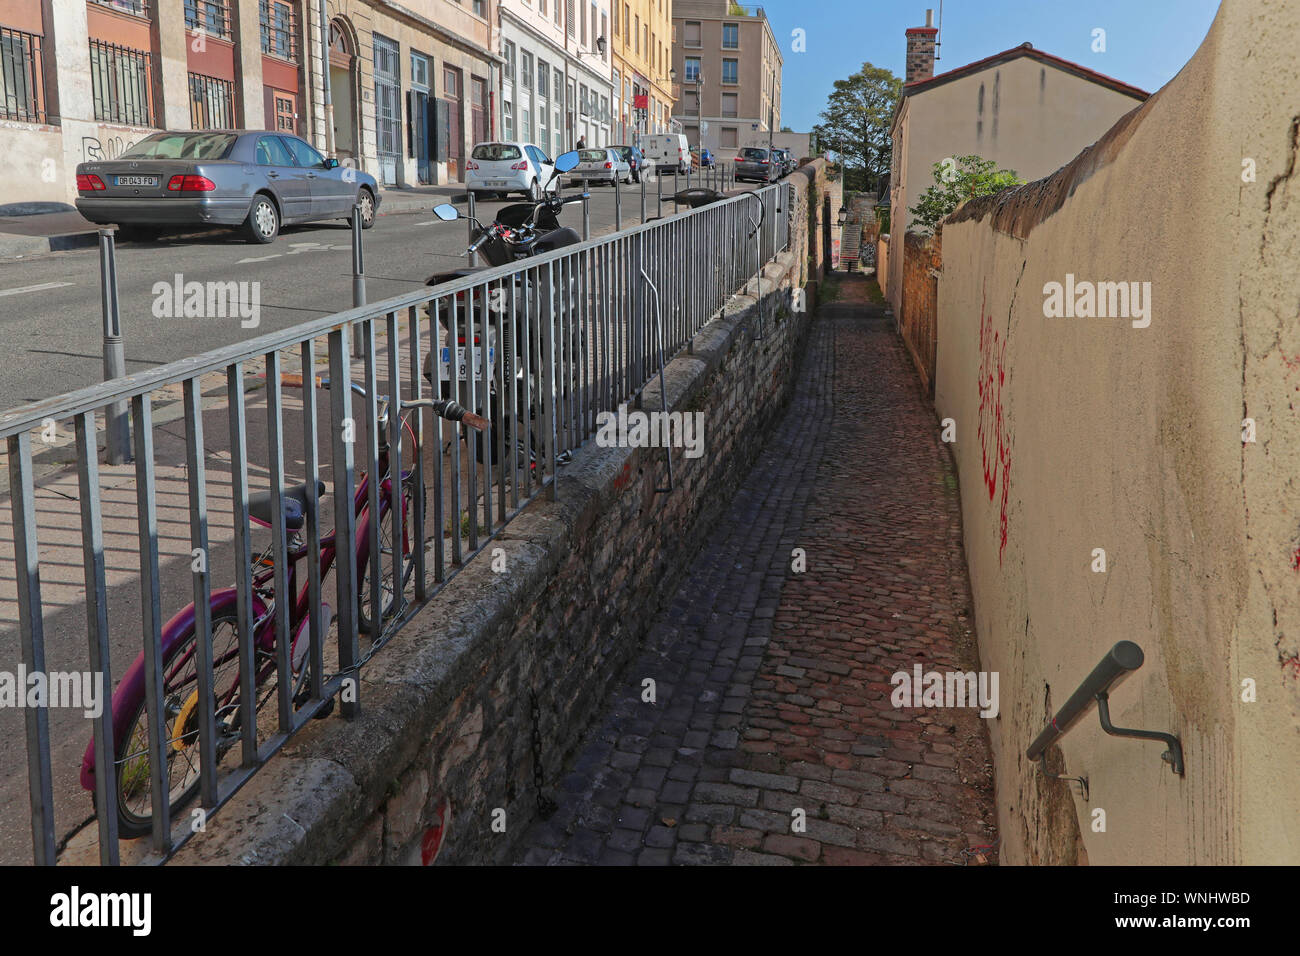 LYON, FRANCE, SEPTEMBER 6, 2019 : La Croix-Rousse is a hill as well as the name of a neighborhood located here. The district is heavily influenced by Stock Photo